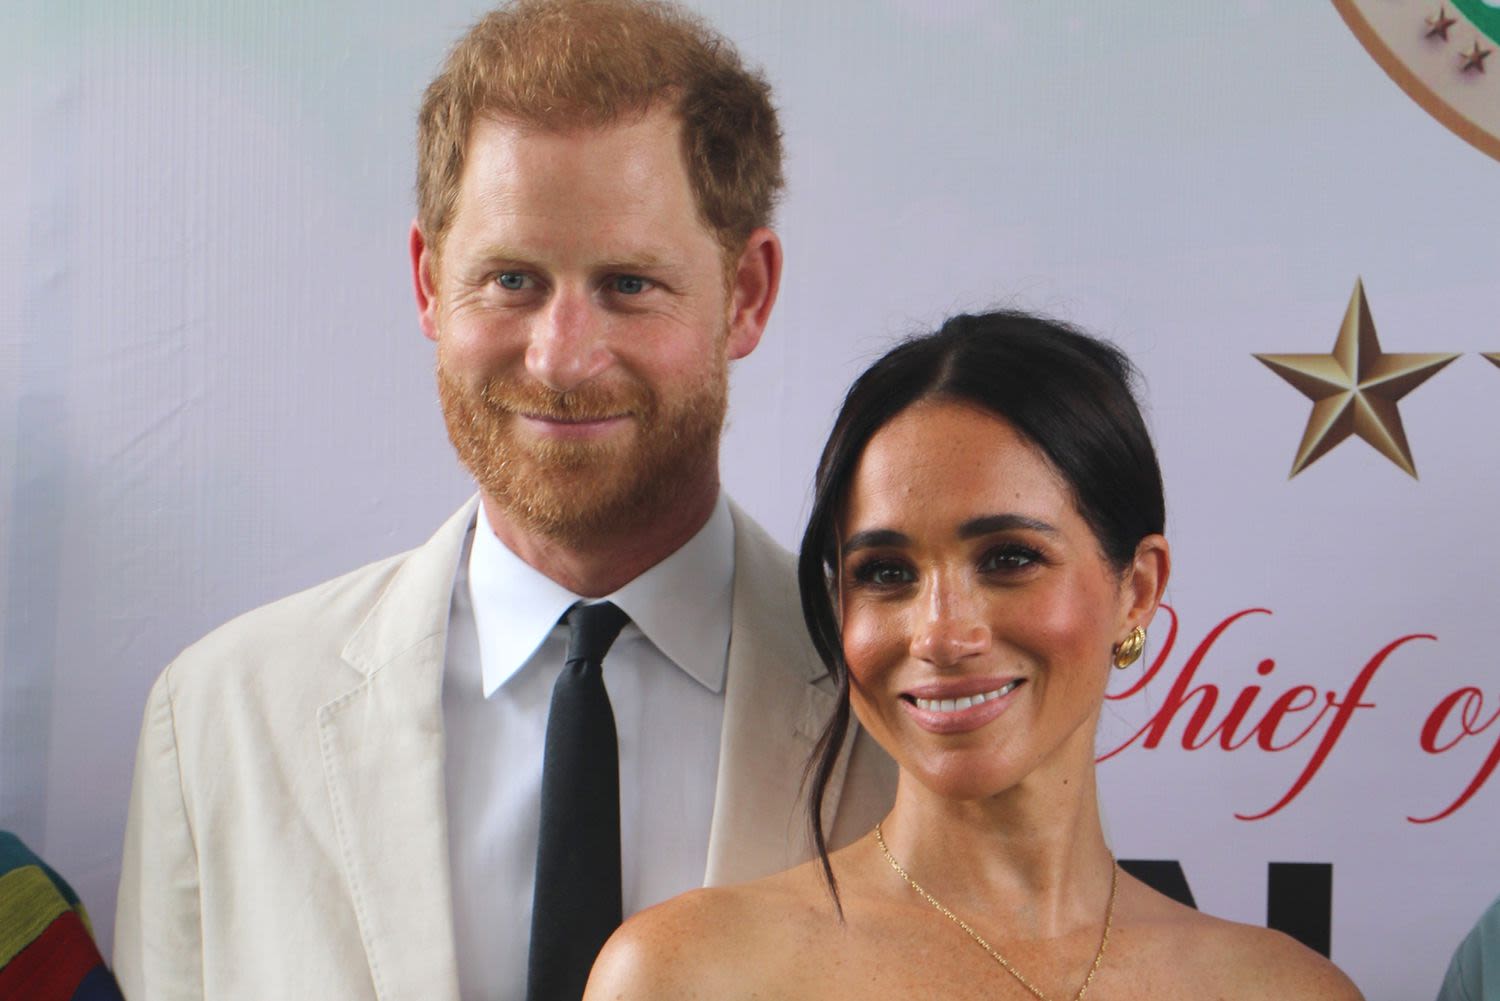 Meghan Markle Recalls Her Suits Days, Life Before Prince Harry and How Everything Had a 'Plot Twist'